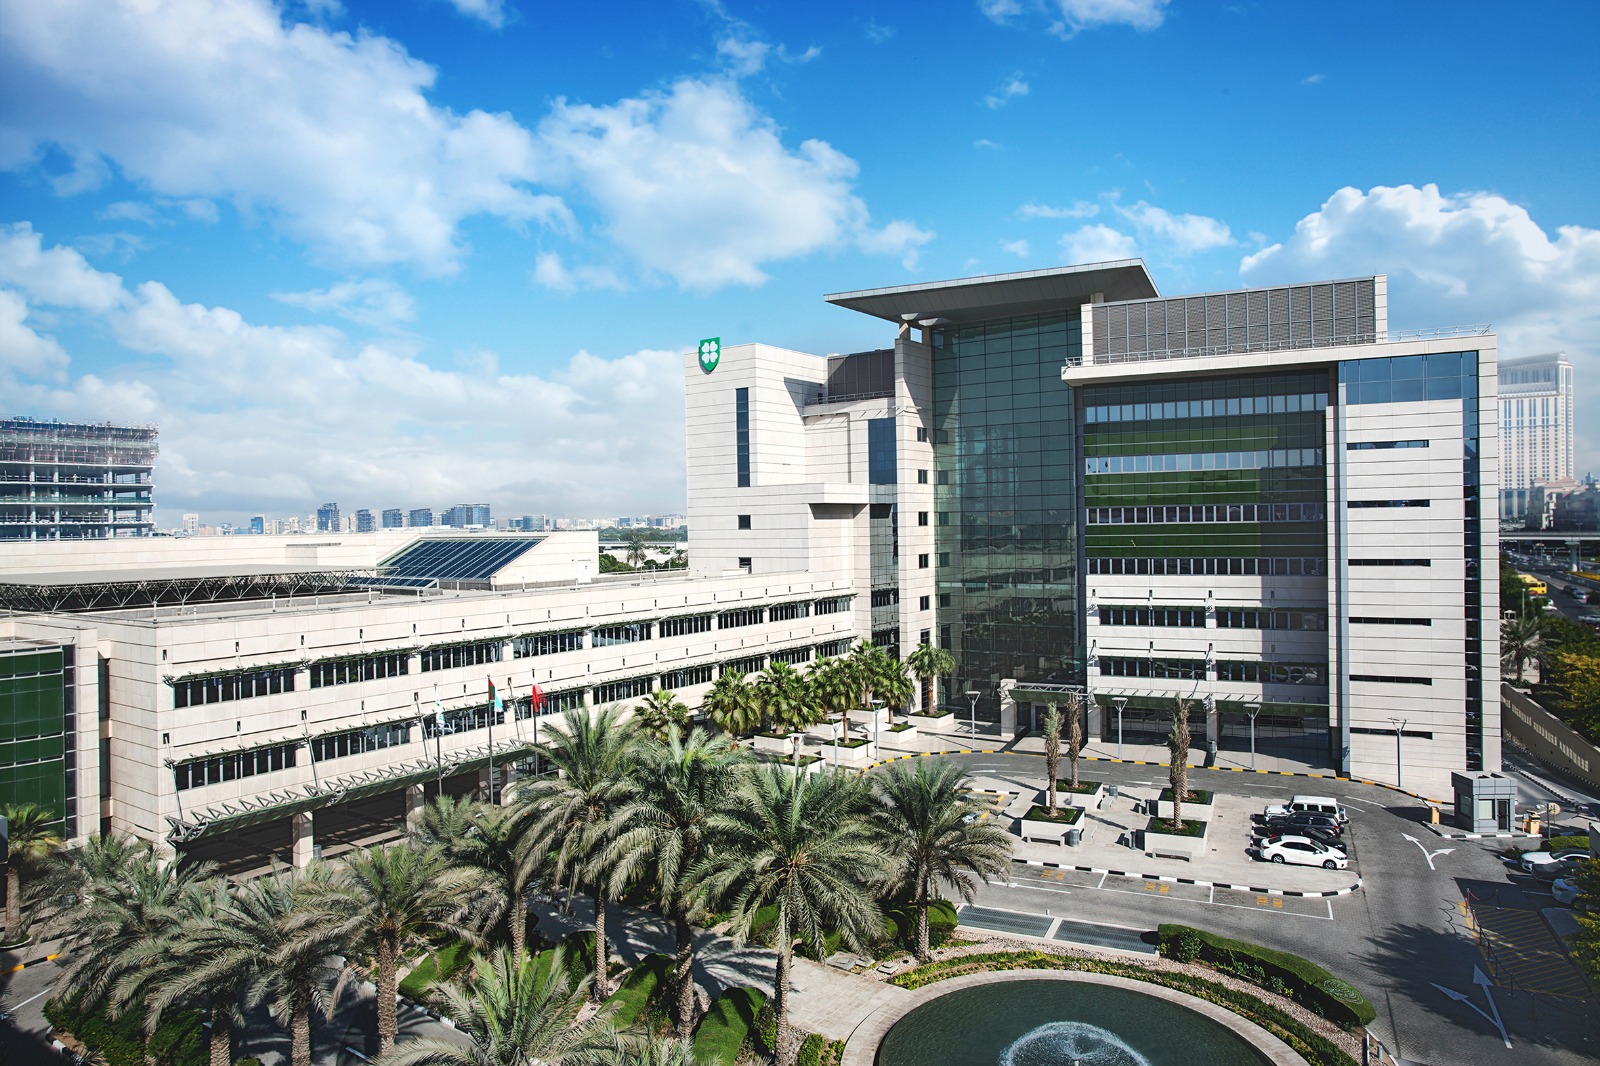 American Hospital Dubai Launches Vision to Lead as the Region's Premier Adopter of Green Healthcare Practices by 2025